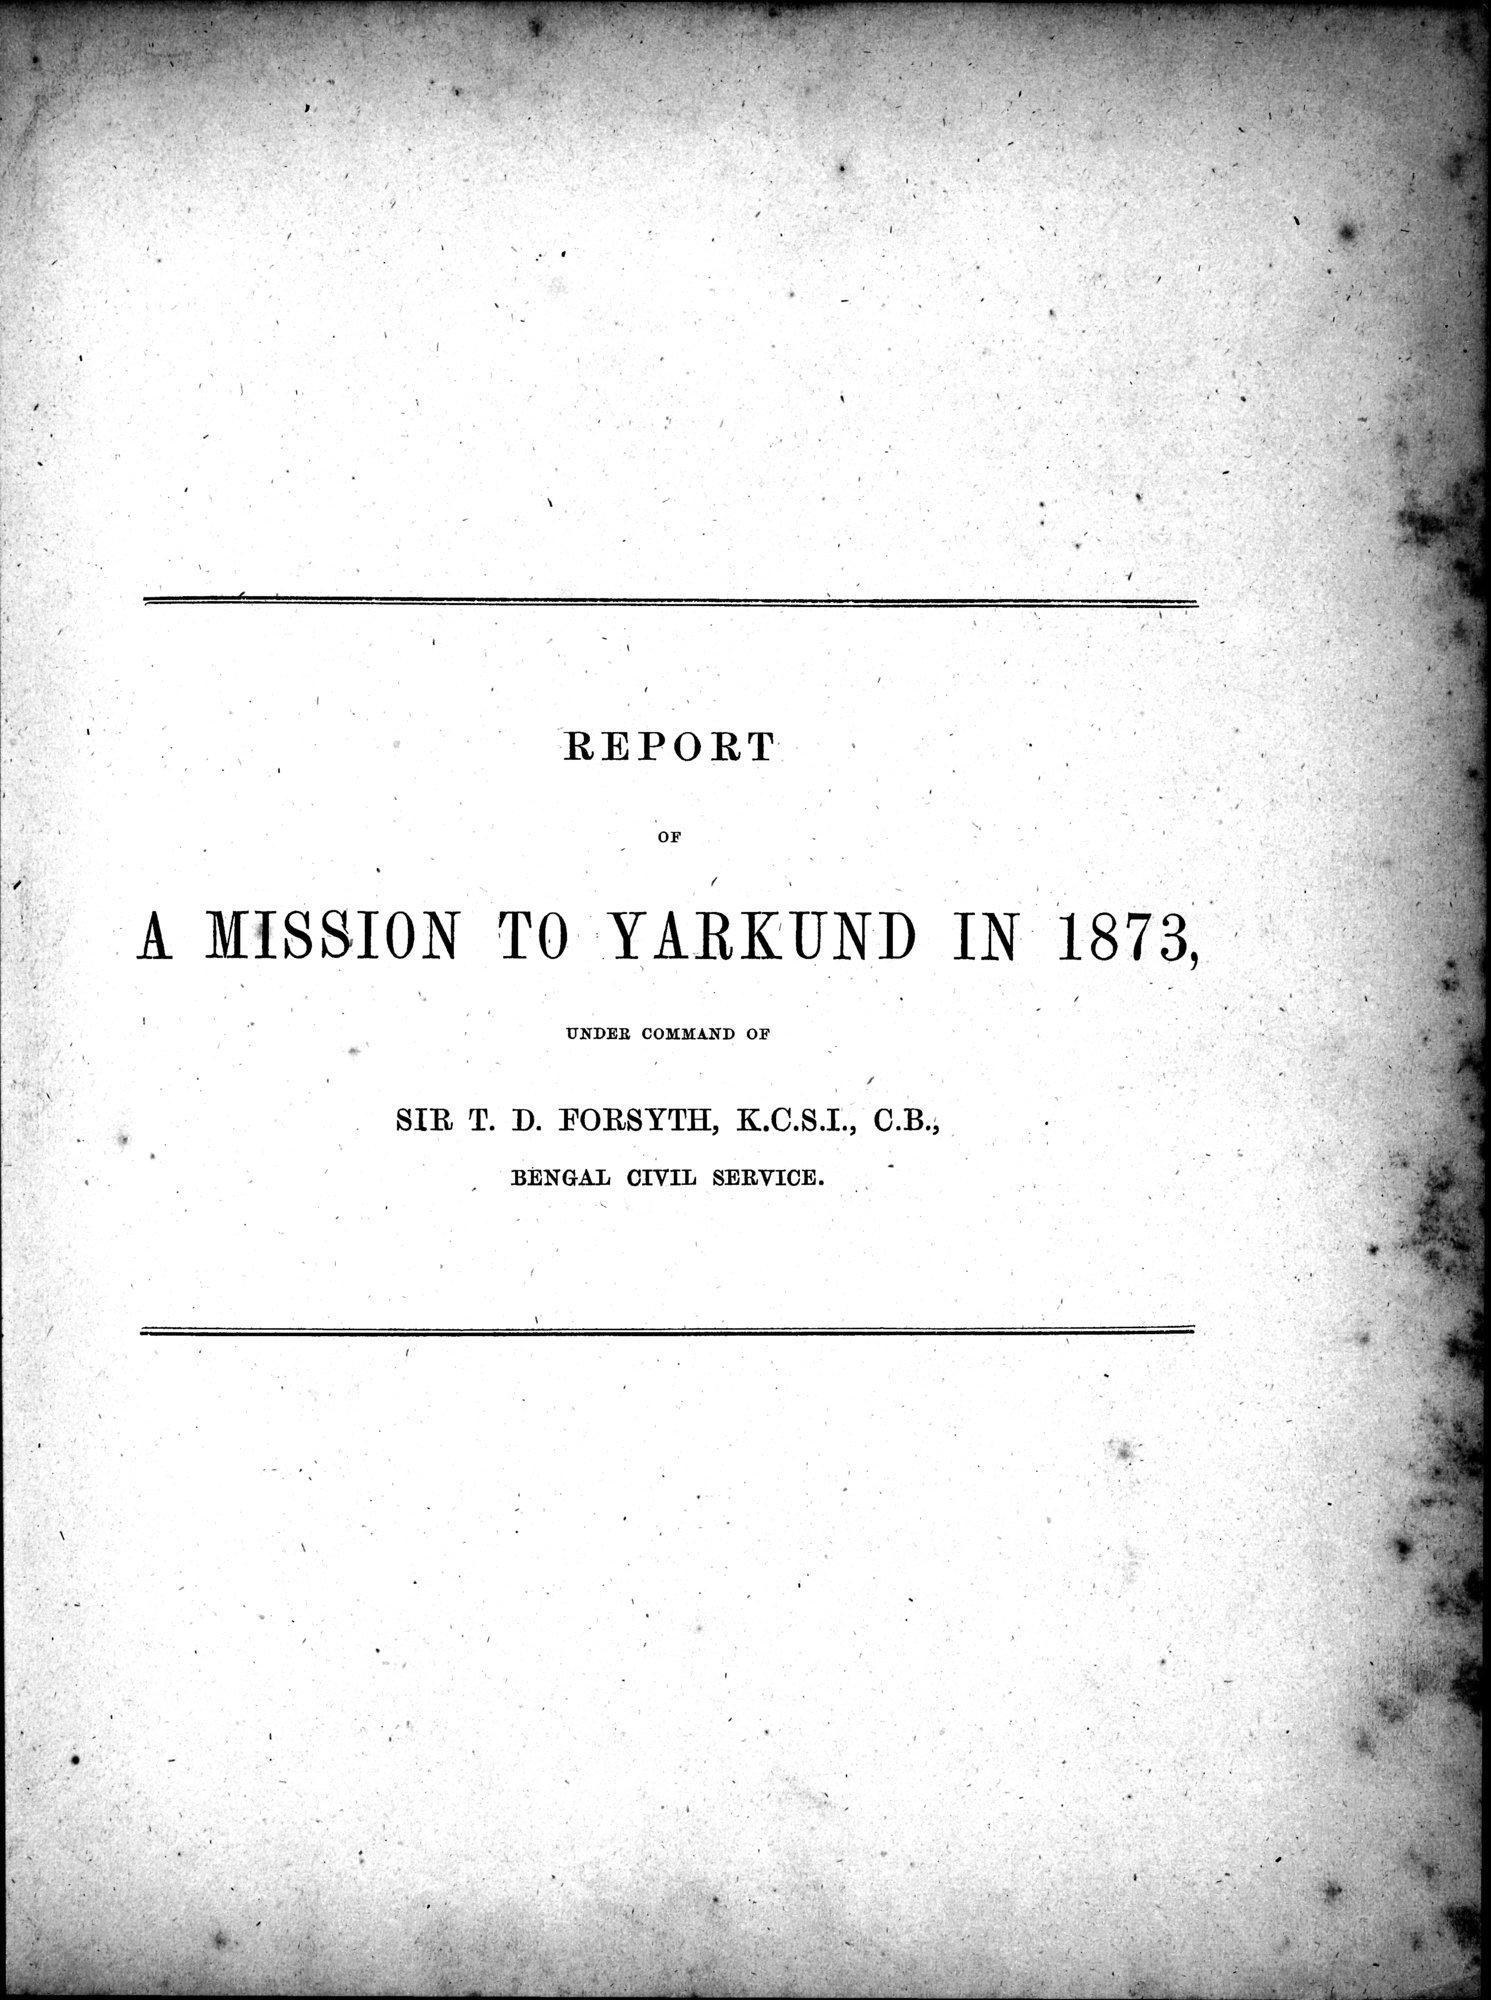 Report of a Mission to Yarkund in 1873 : vol.1 / 19 ページ（白黒高解像度画像）